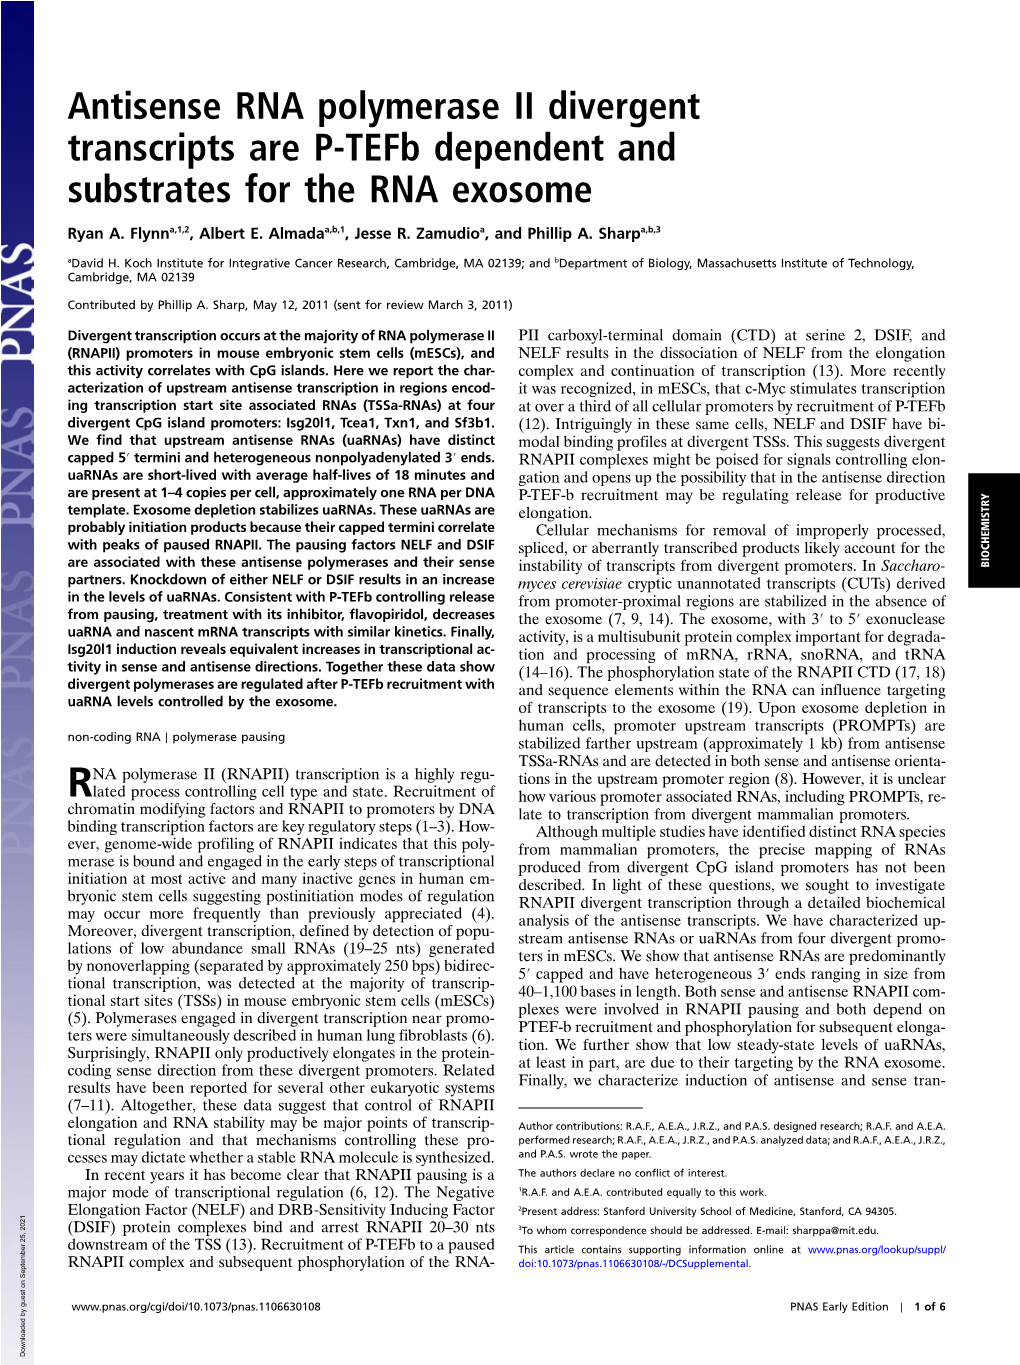 Antisense RNA Polymerase II Divergent Transcripts Are P-Tefb Dependent and Substrates for the RNA Exosome